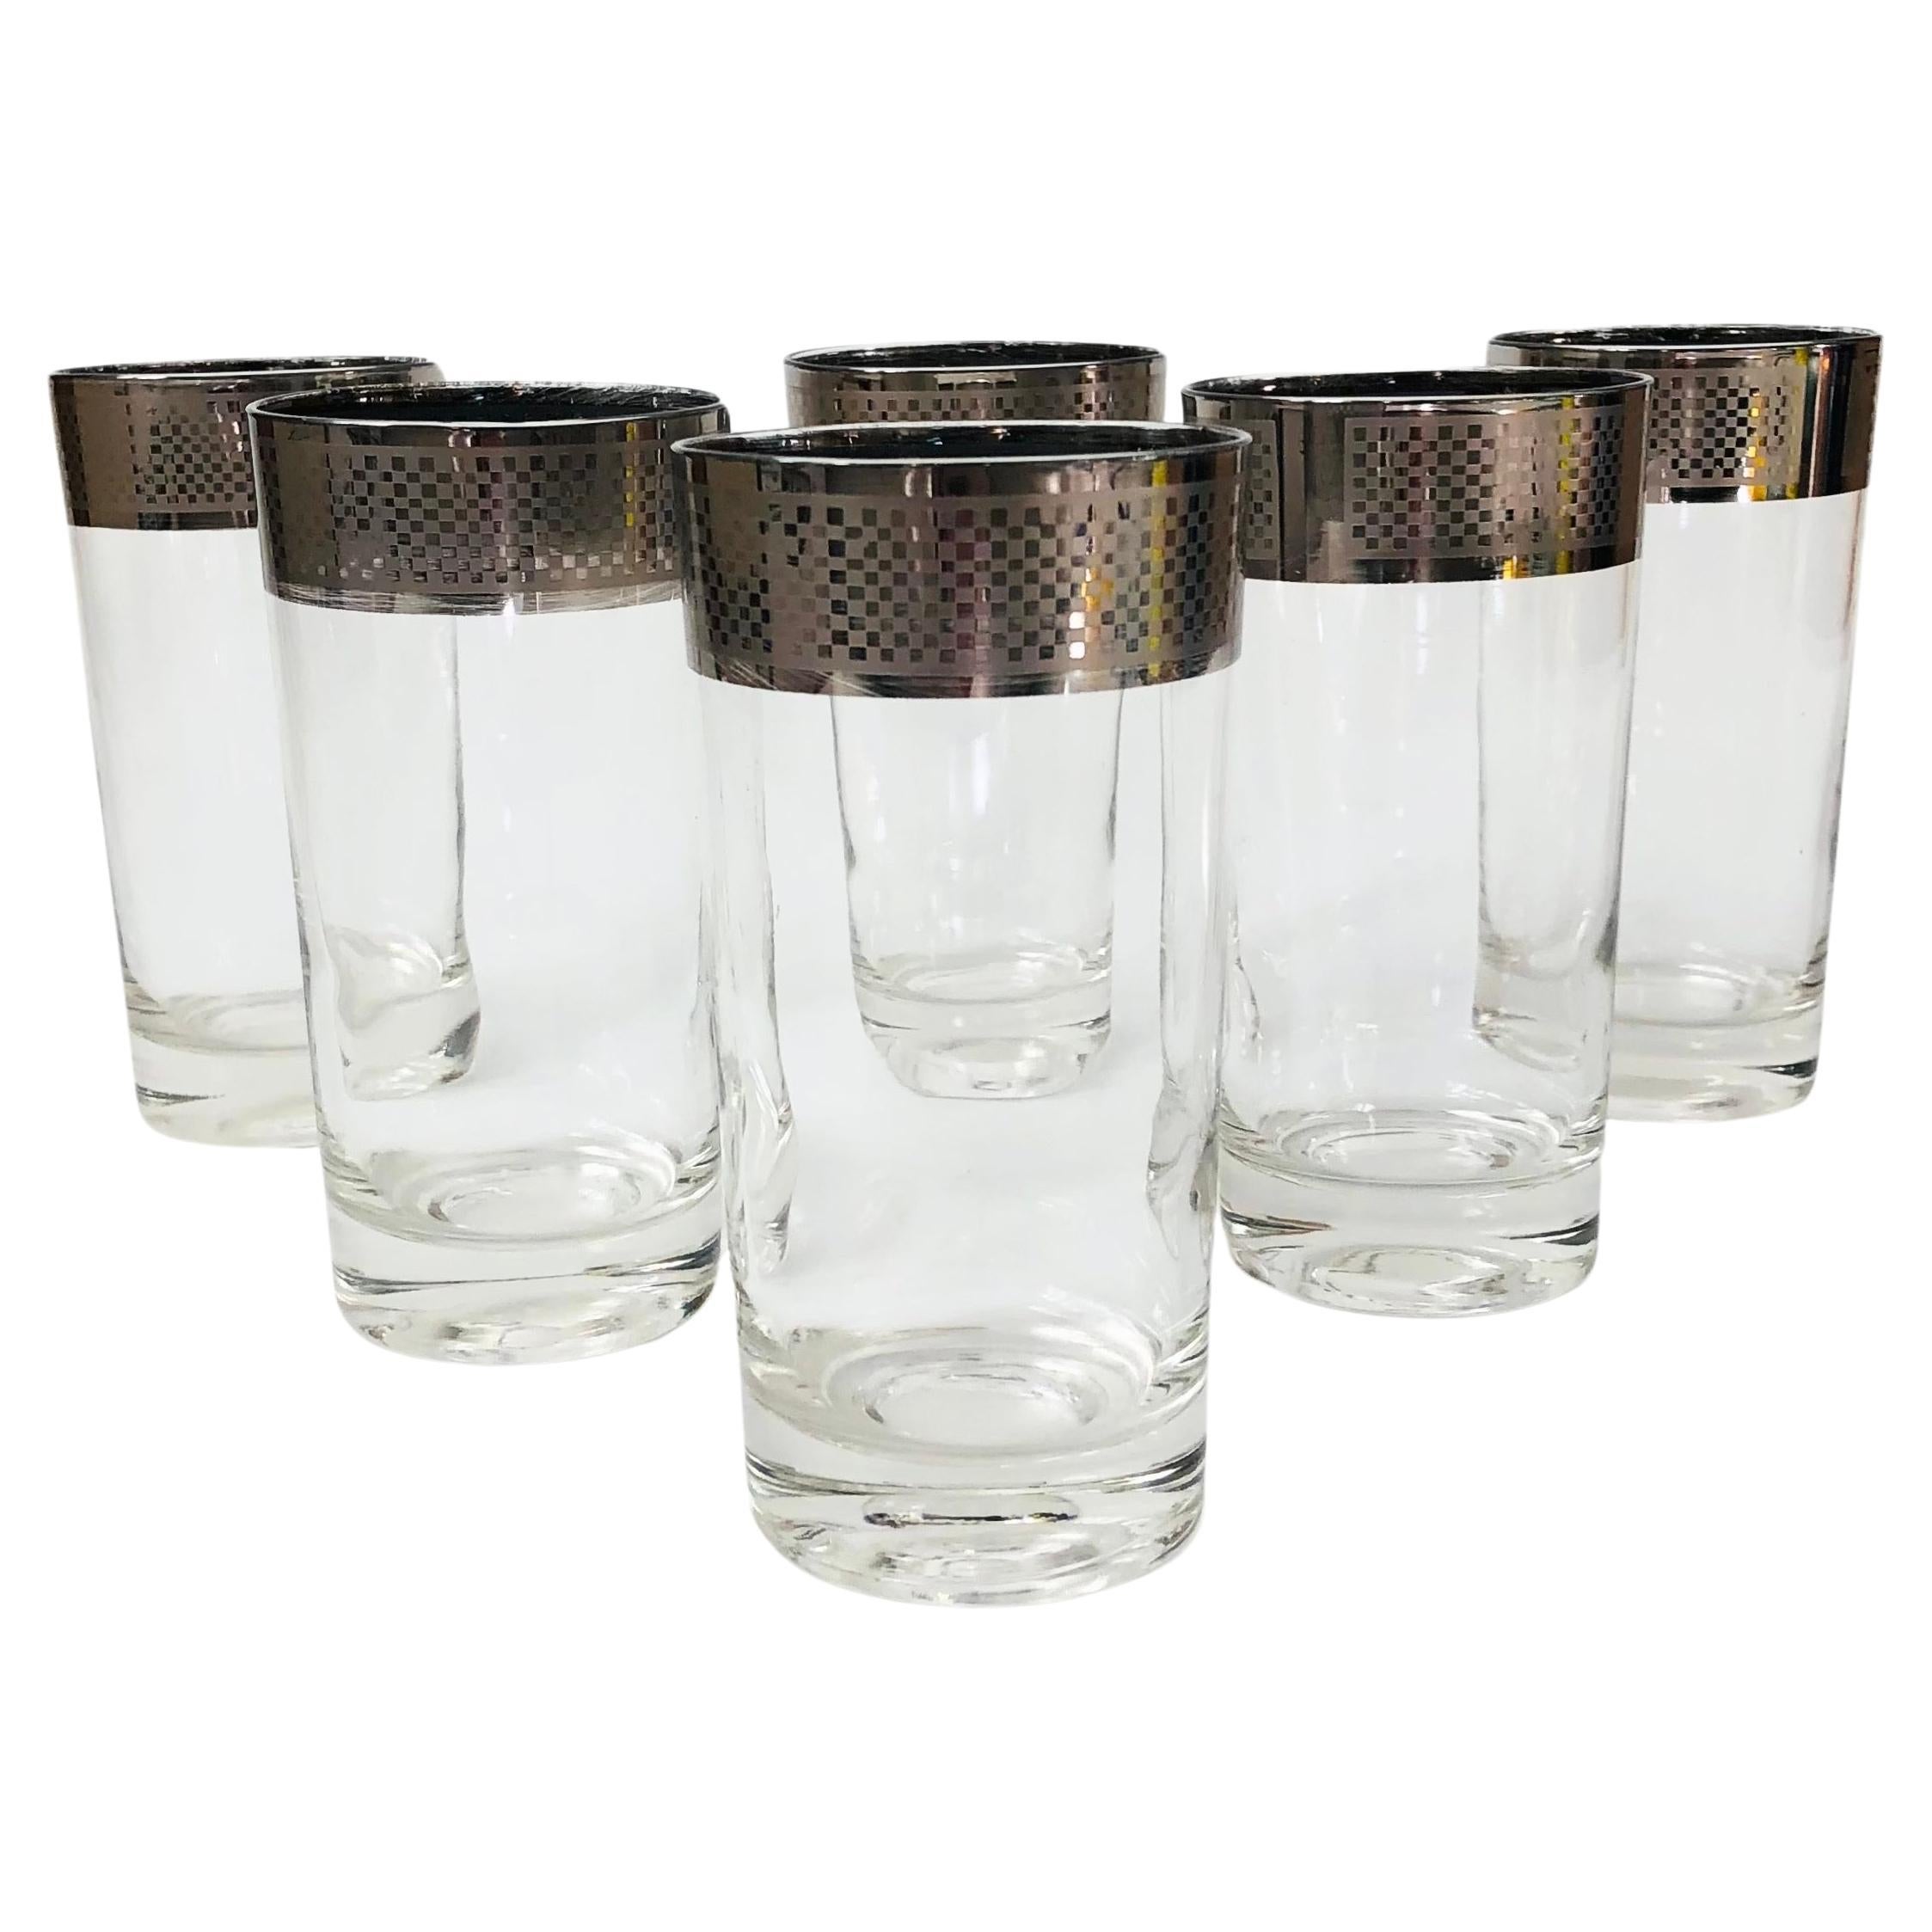 Mid Century Checkered Silver Rim Tumblers - Set of 6 For Sale